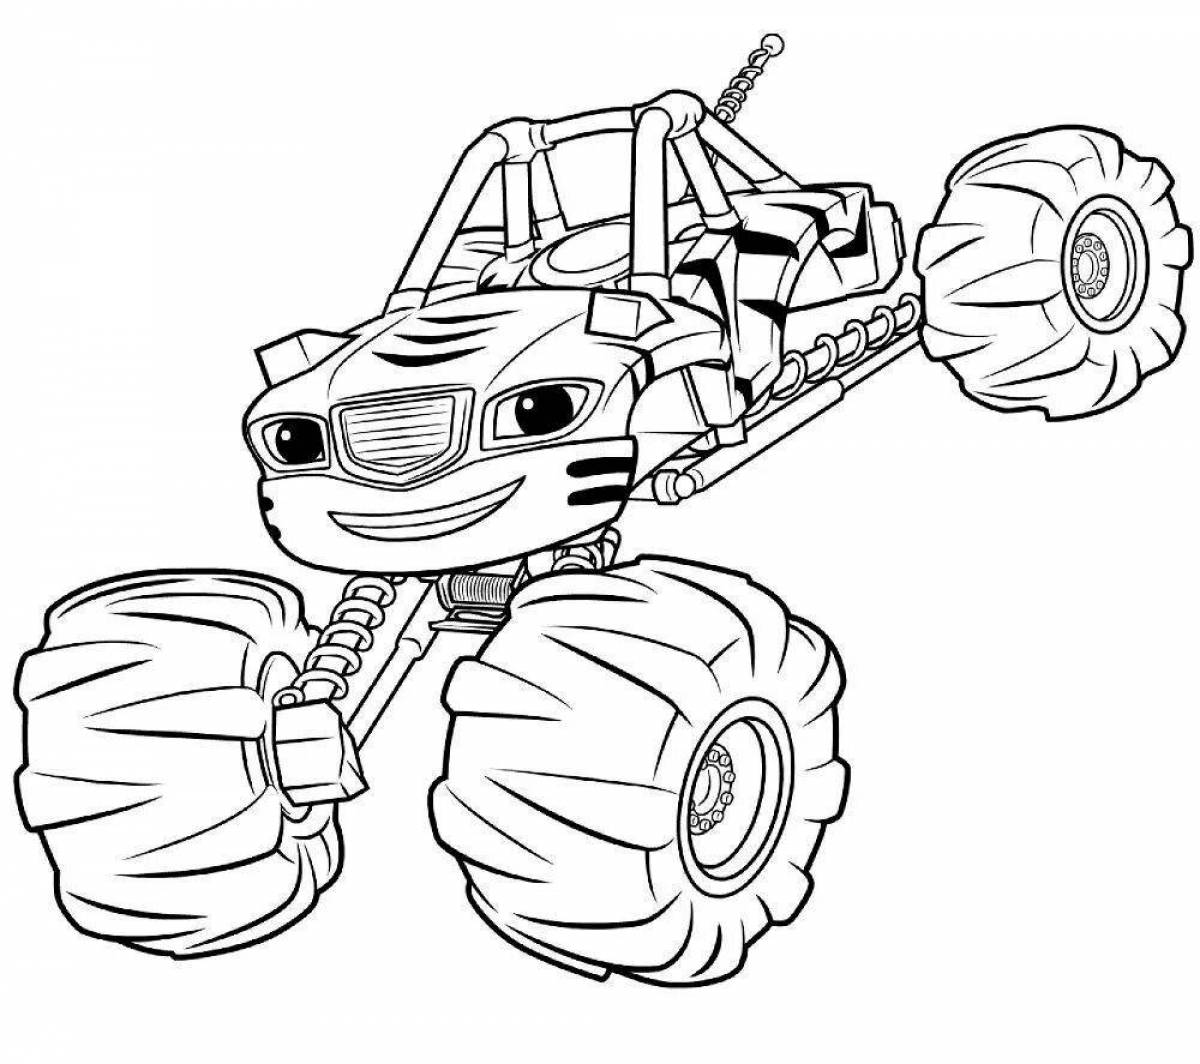 Glowing Flash and Wonder Cars Coloring Pages for Kids